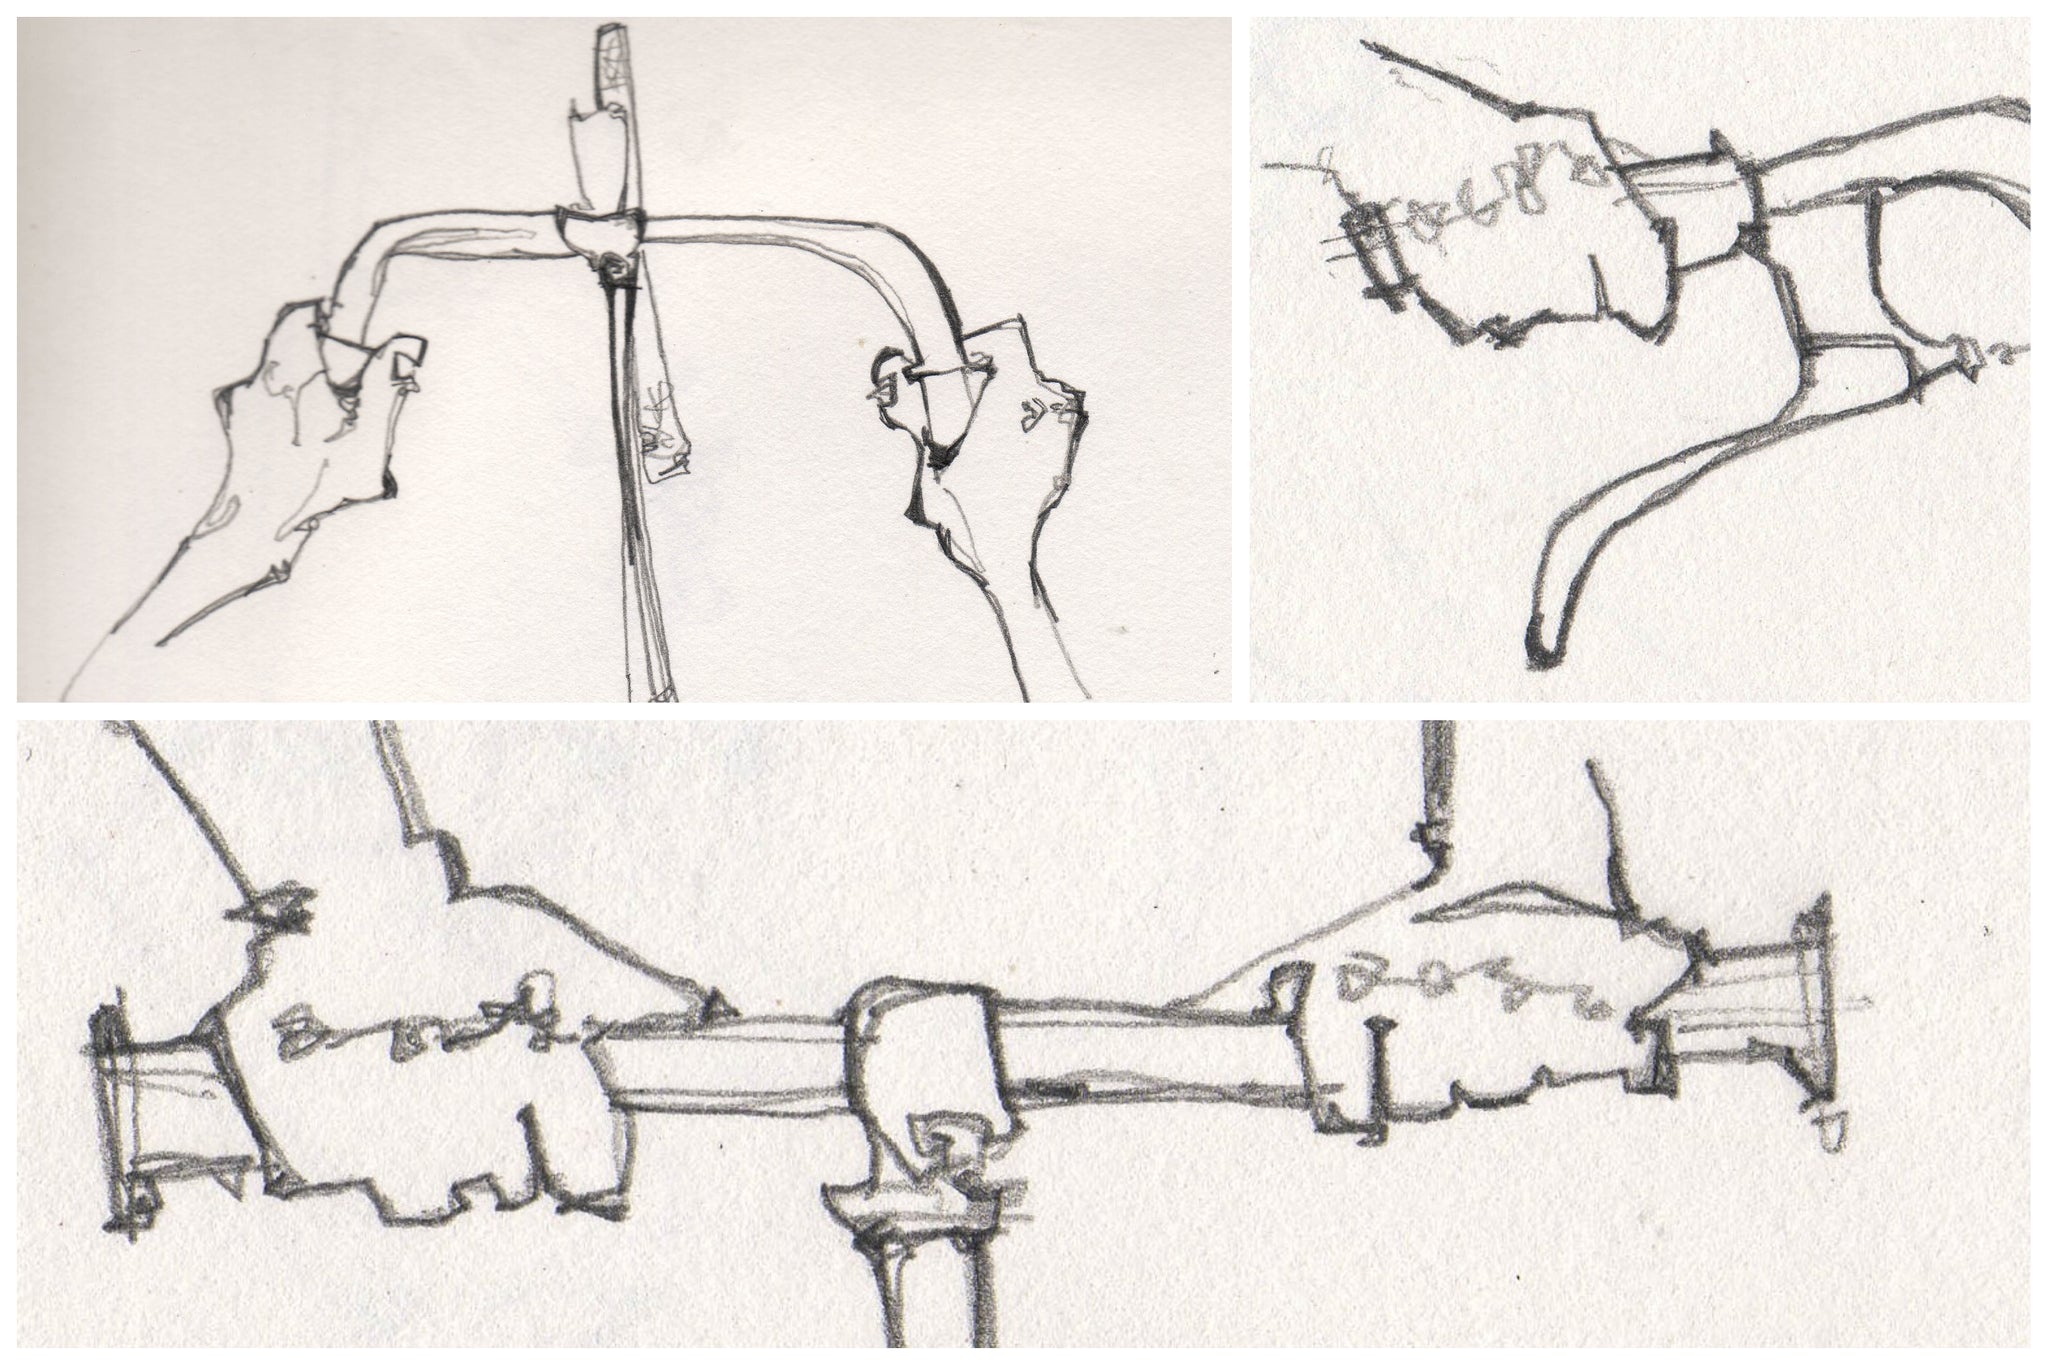 Sketches of handlebars and grips